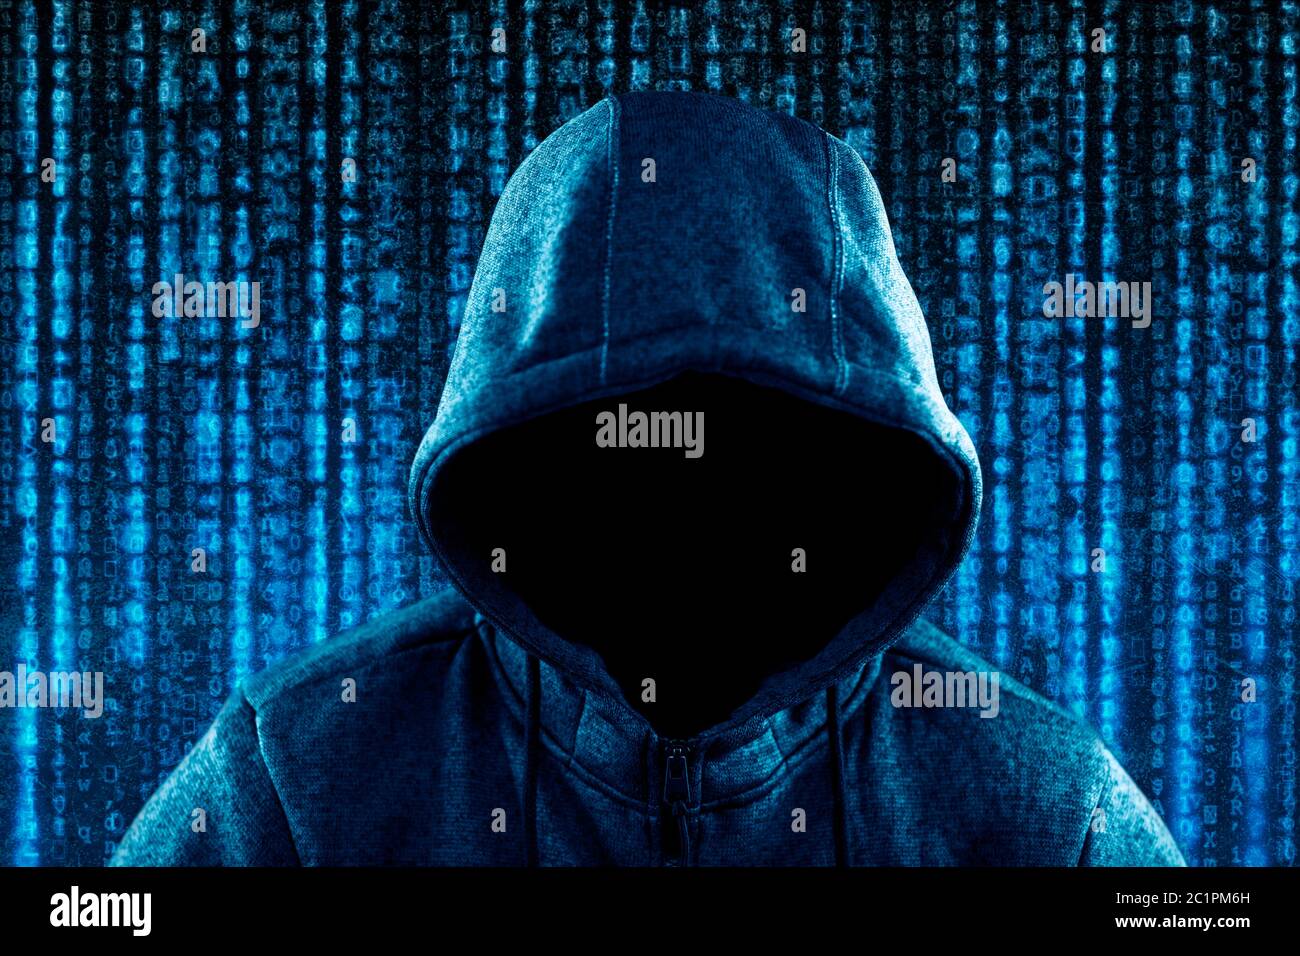 Anonymous hooded computer hacker portrait on computer code background Stock Photo